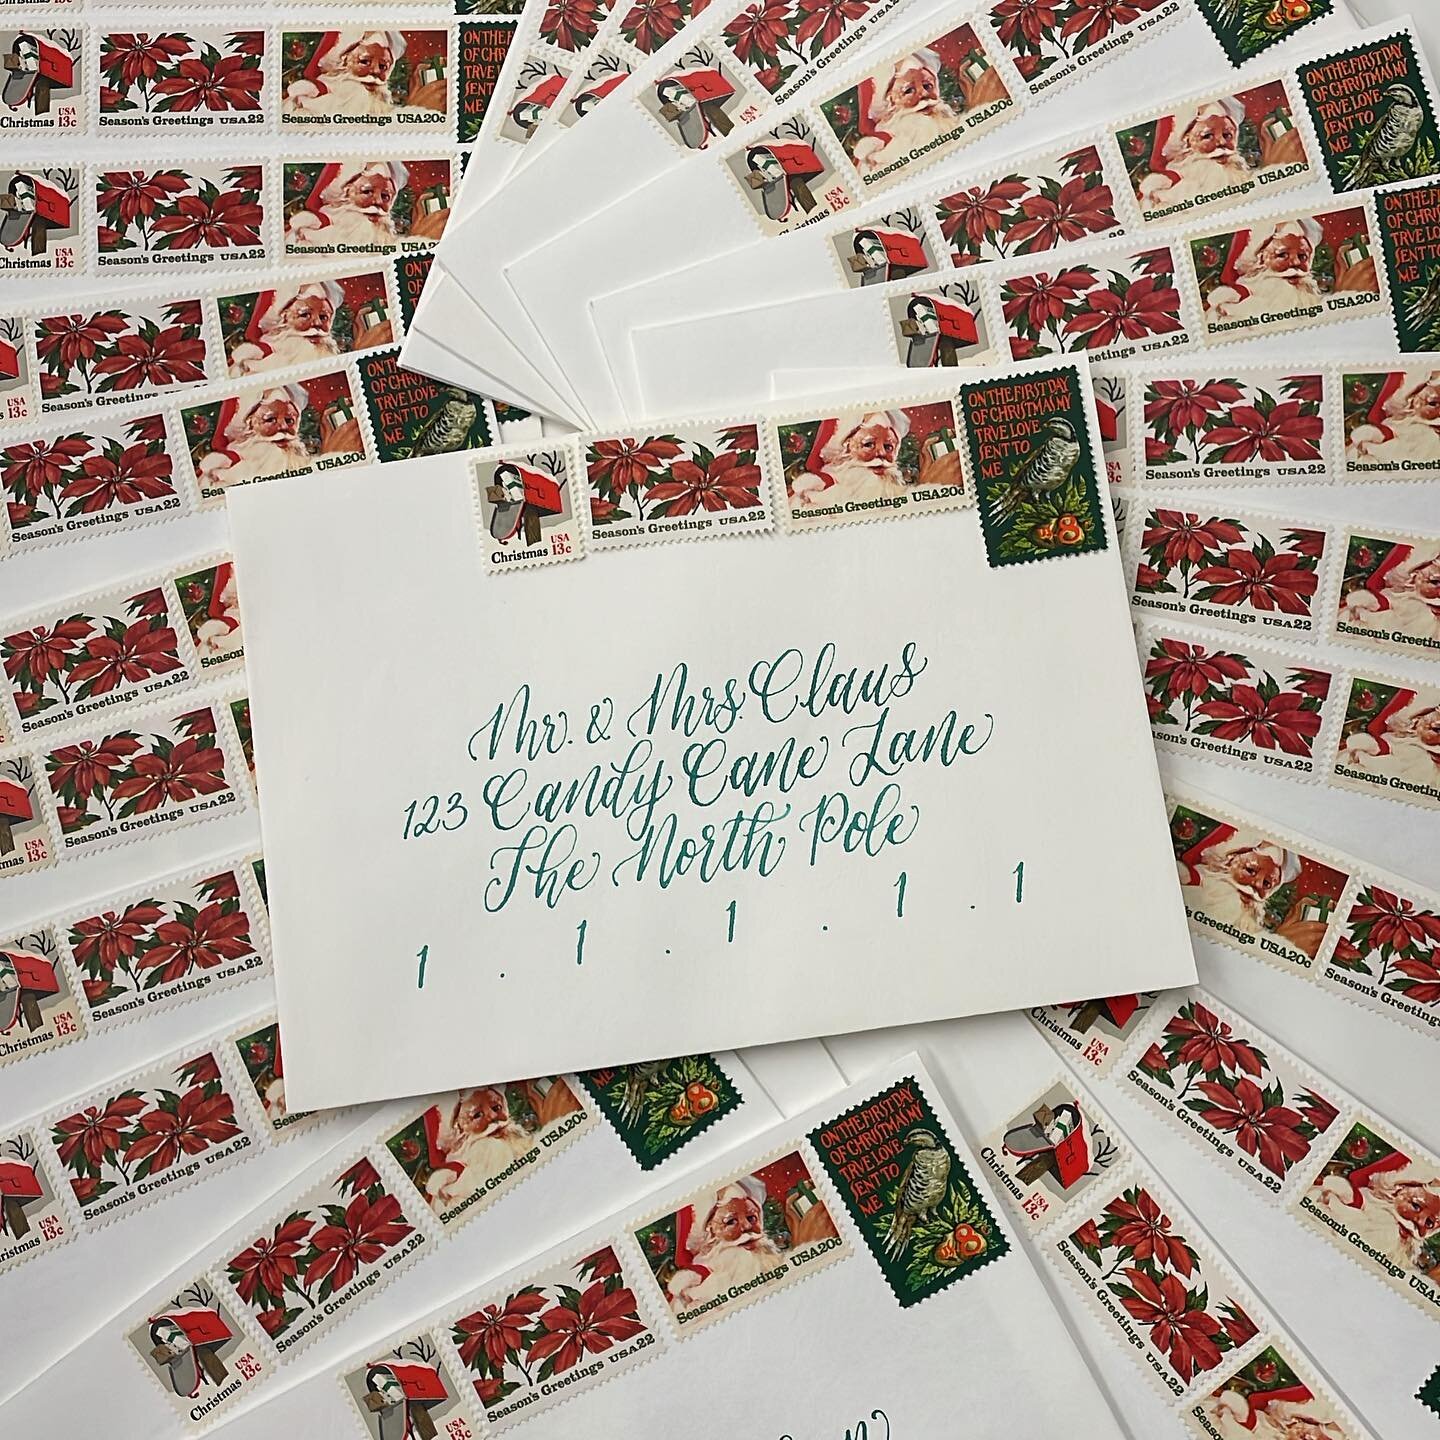 The postage though 💌🎄✨ Thank you @littlepostagehouse for these gorgeous stamps! I had so much fun making our Christmas cards this year! ❤️